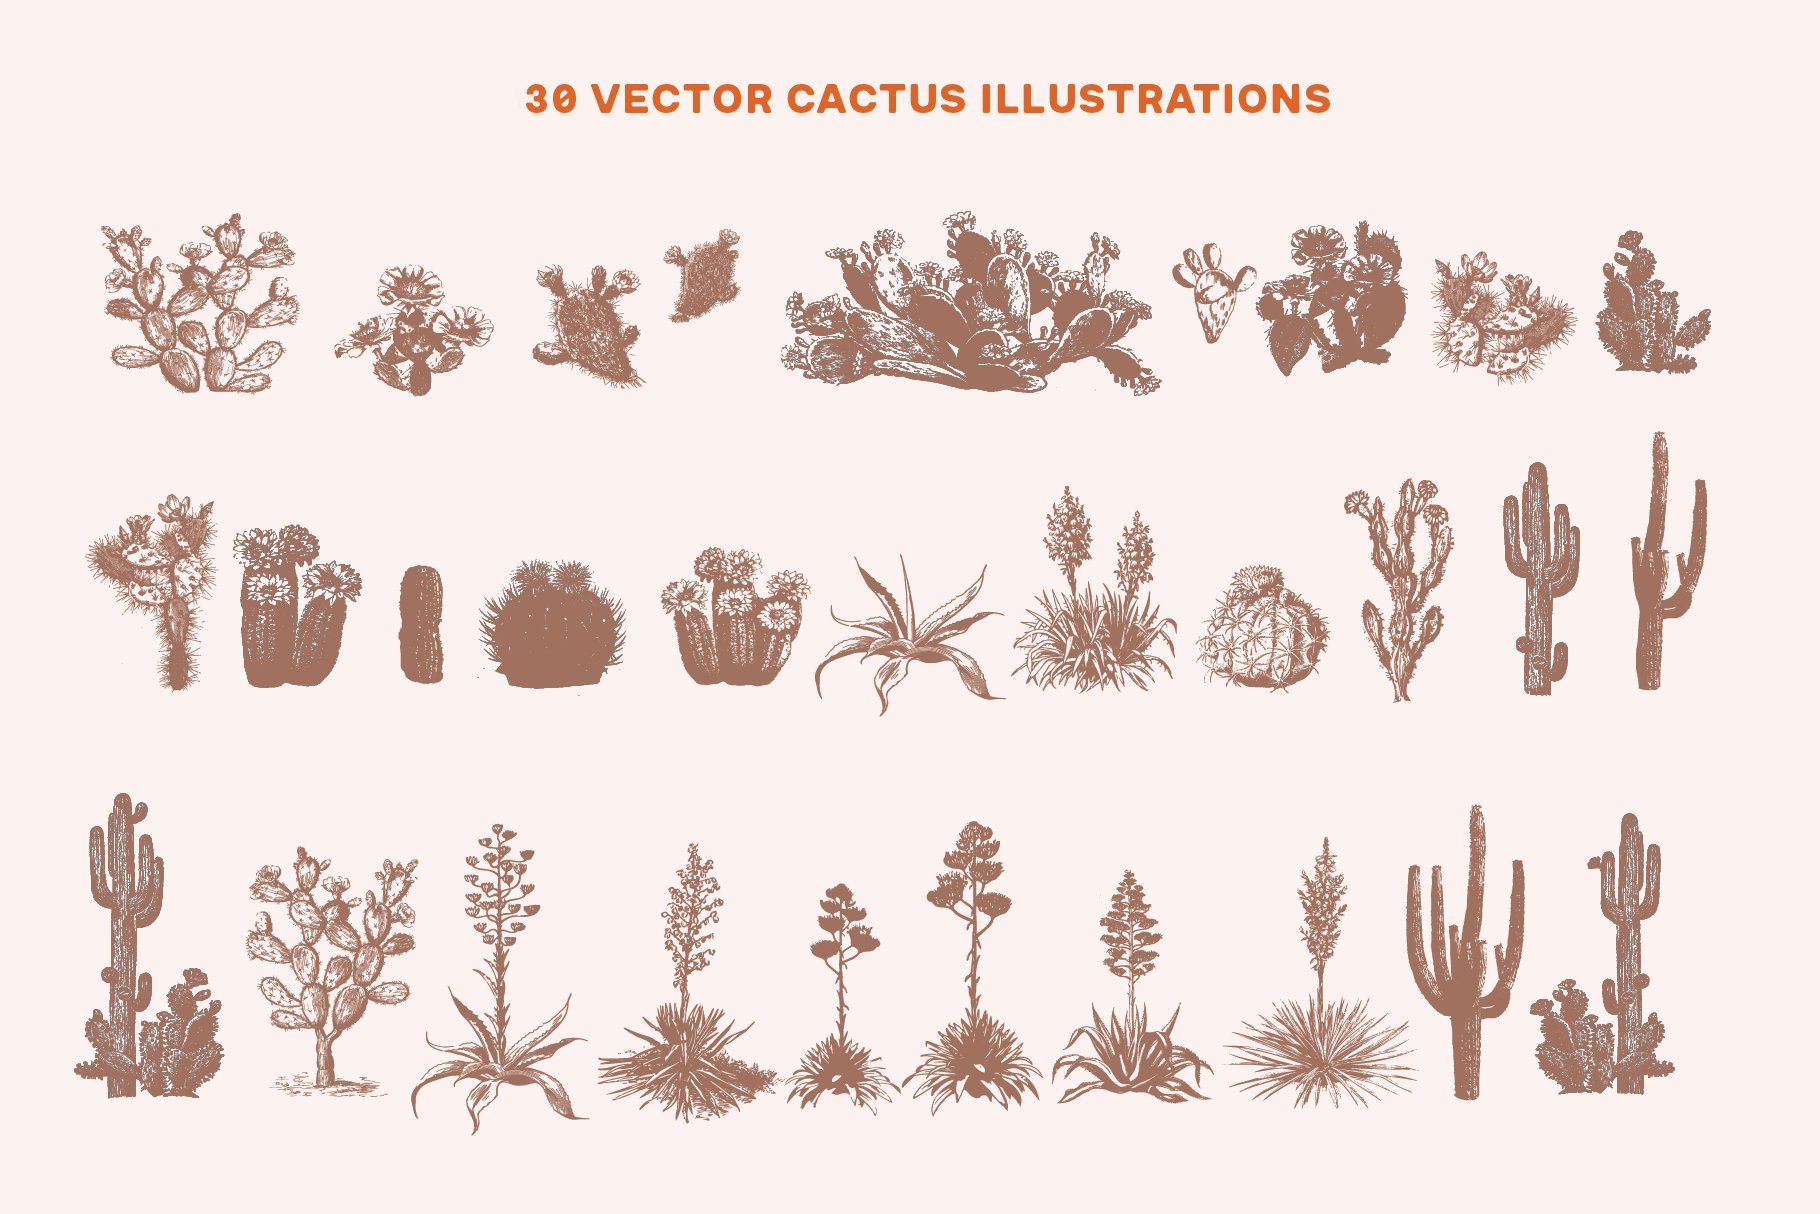 Variety of cactus illustrations on a white background.